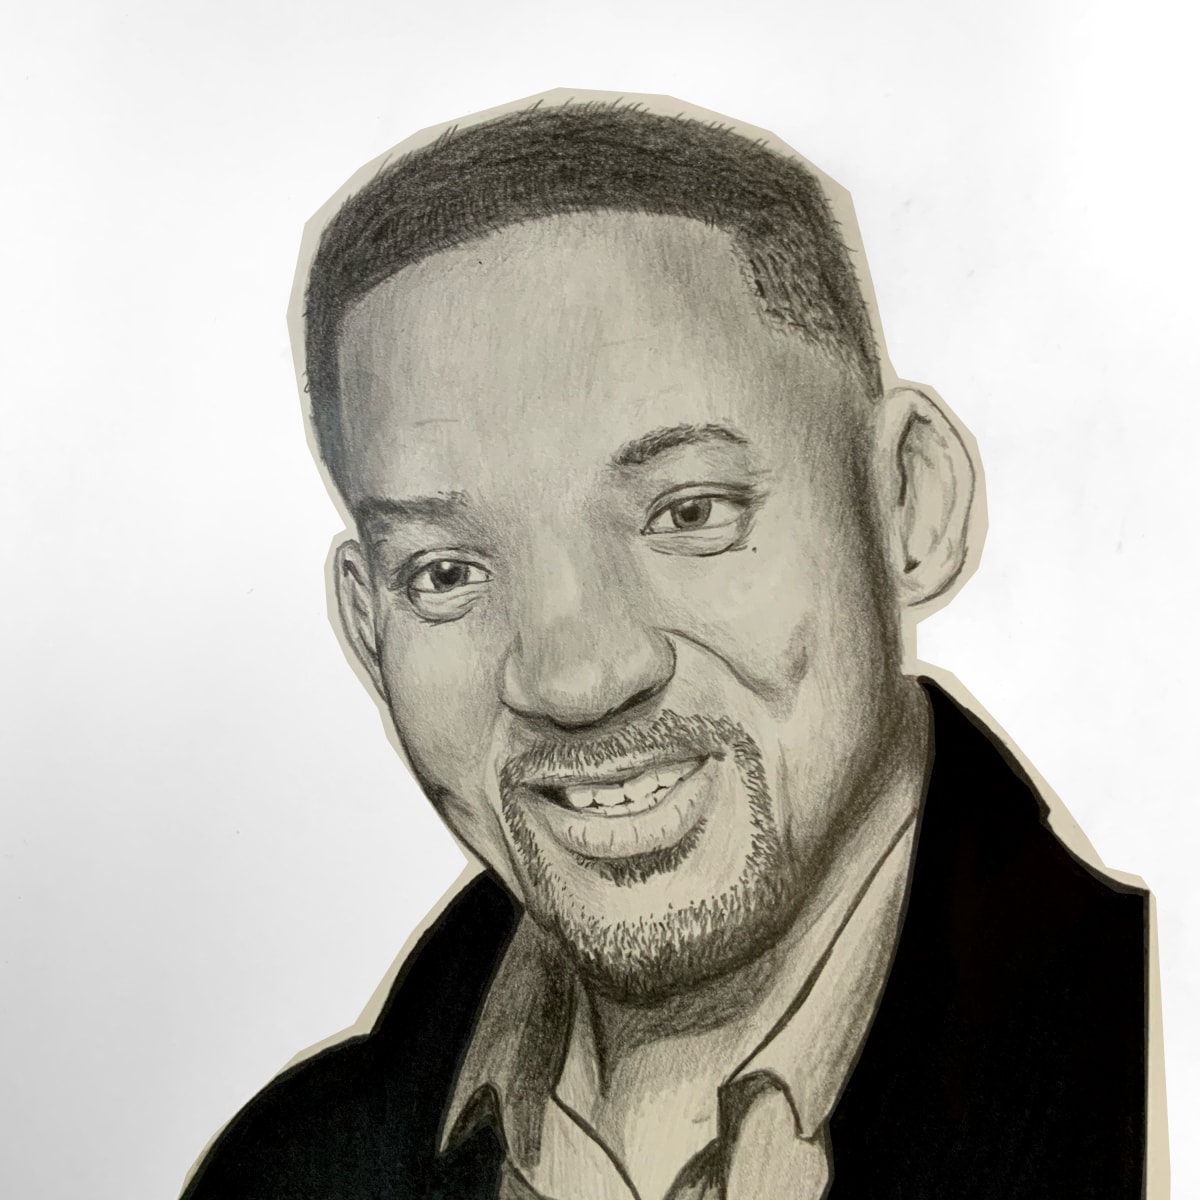 Will Smith caricature drawing  Kaericature art by kaexi  Facebook